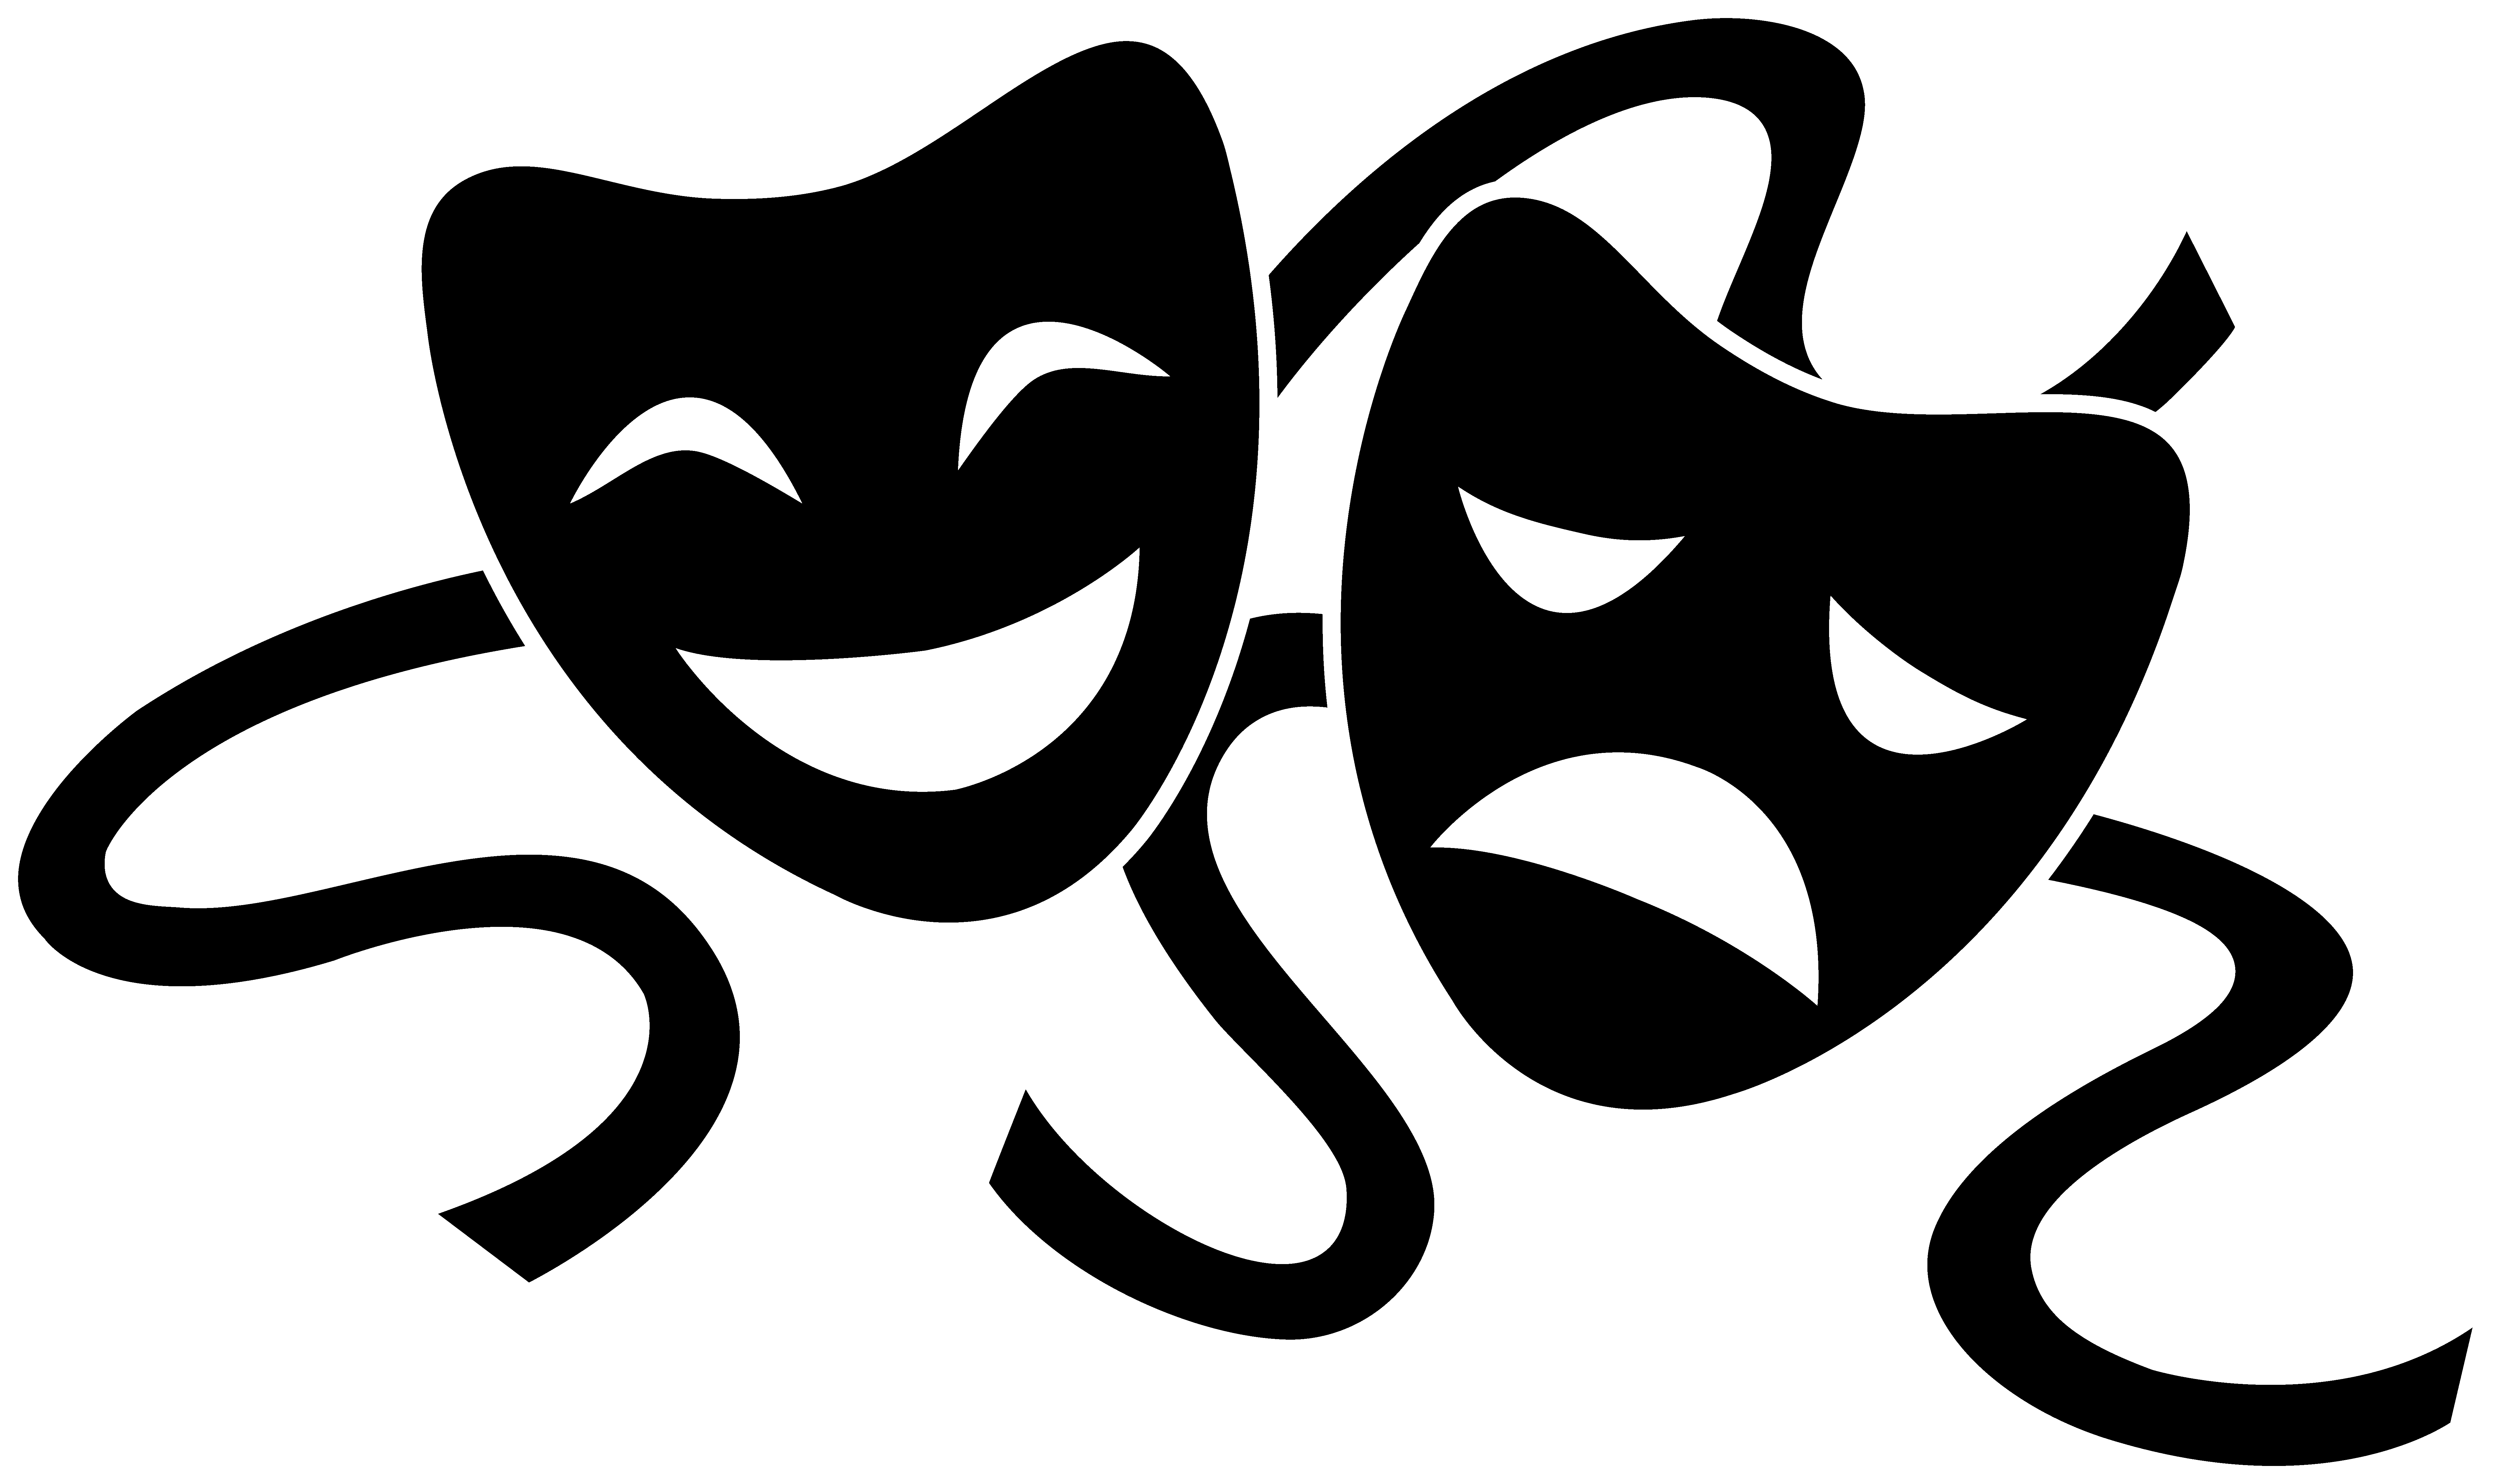 Drama clip art free. Poetry clipart black and white